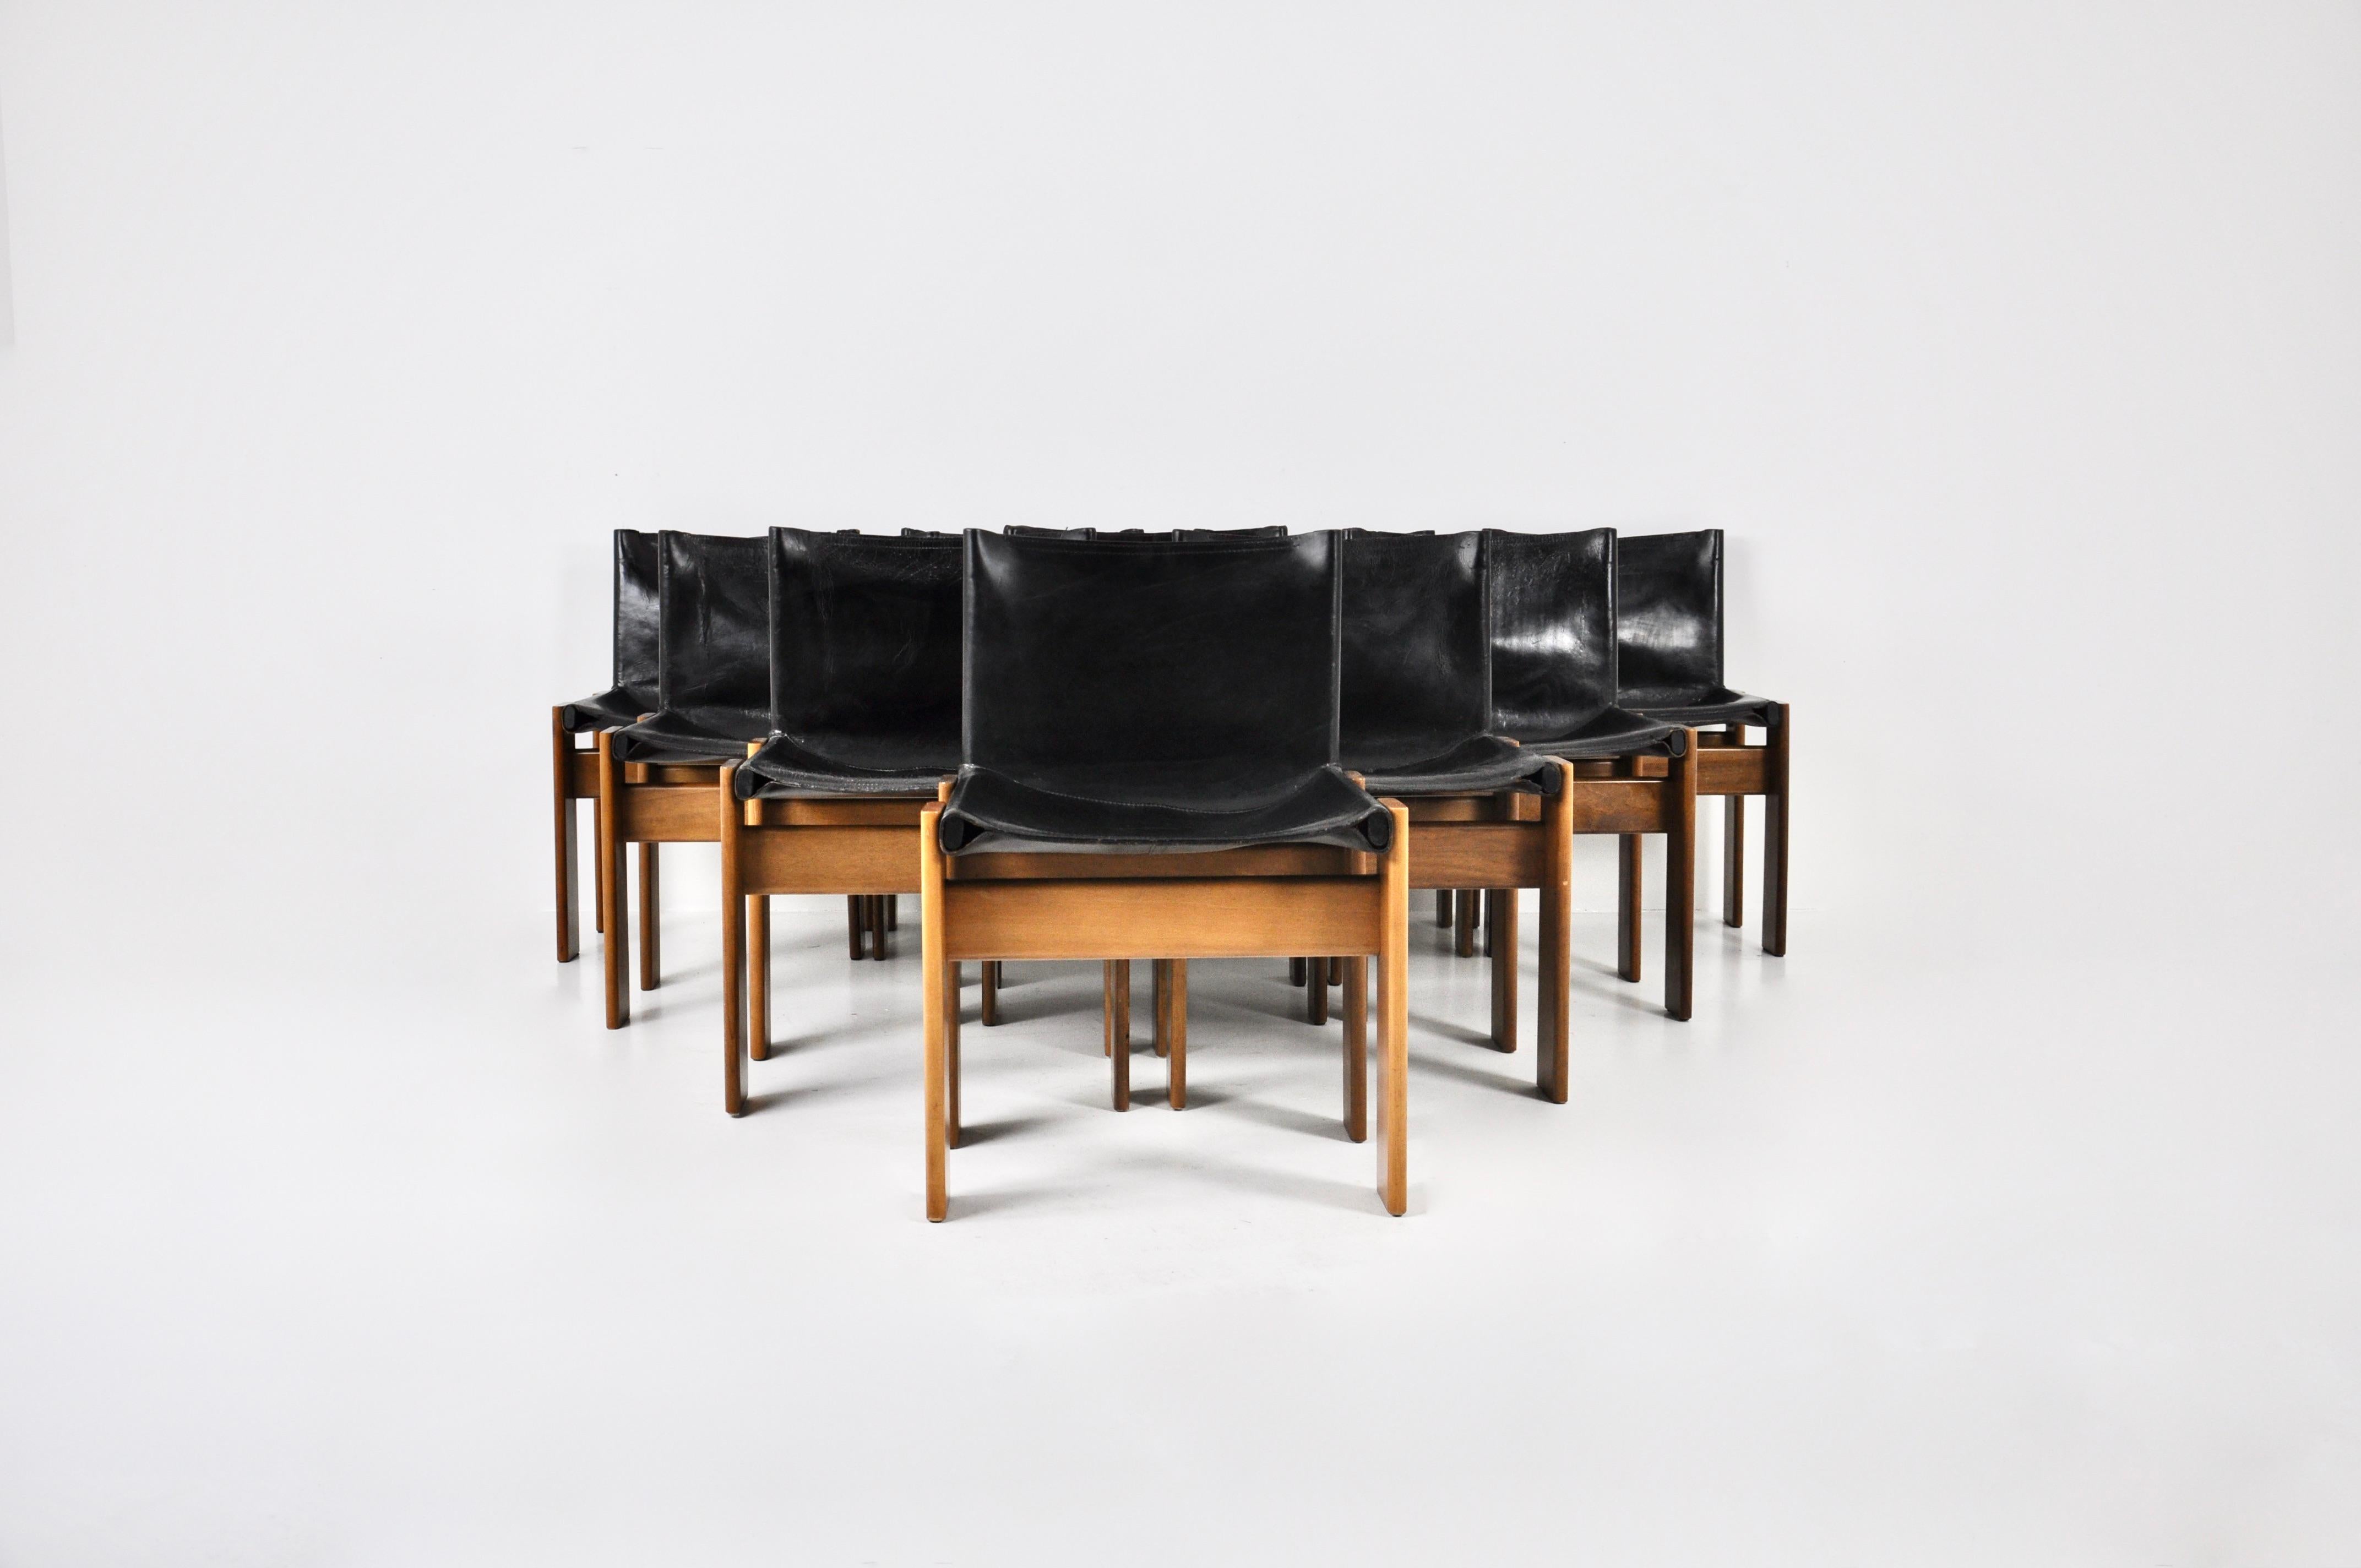 Set of 10 chairs in black leather and wood designed by Afra & Tobia Scarpa. Model: Monk. Seat height: 41cm Wear due to time and age of the chairs.
 